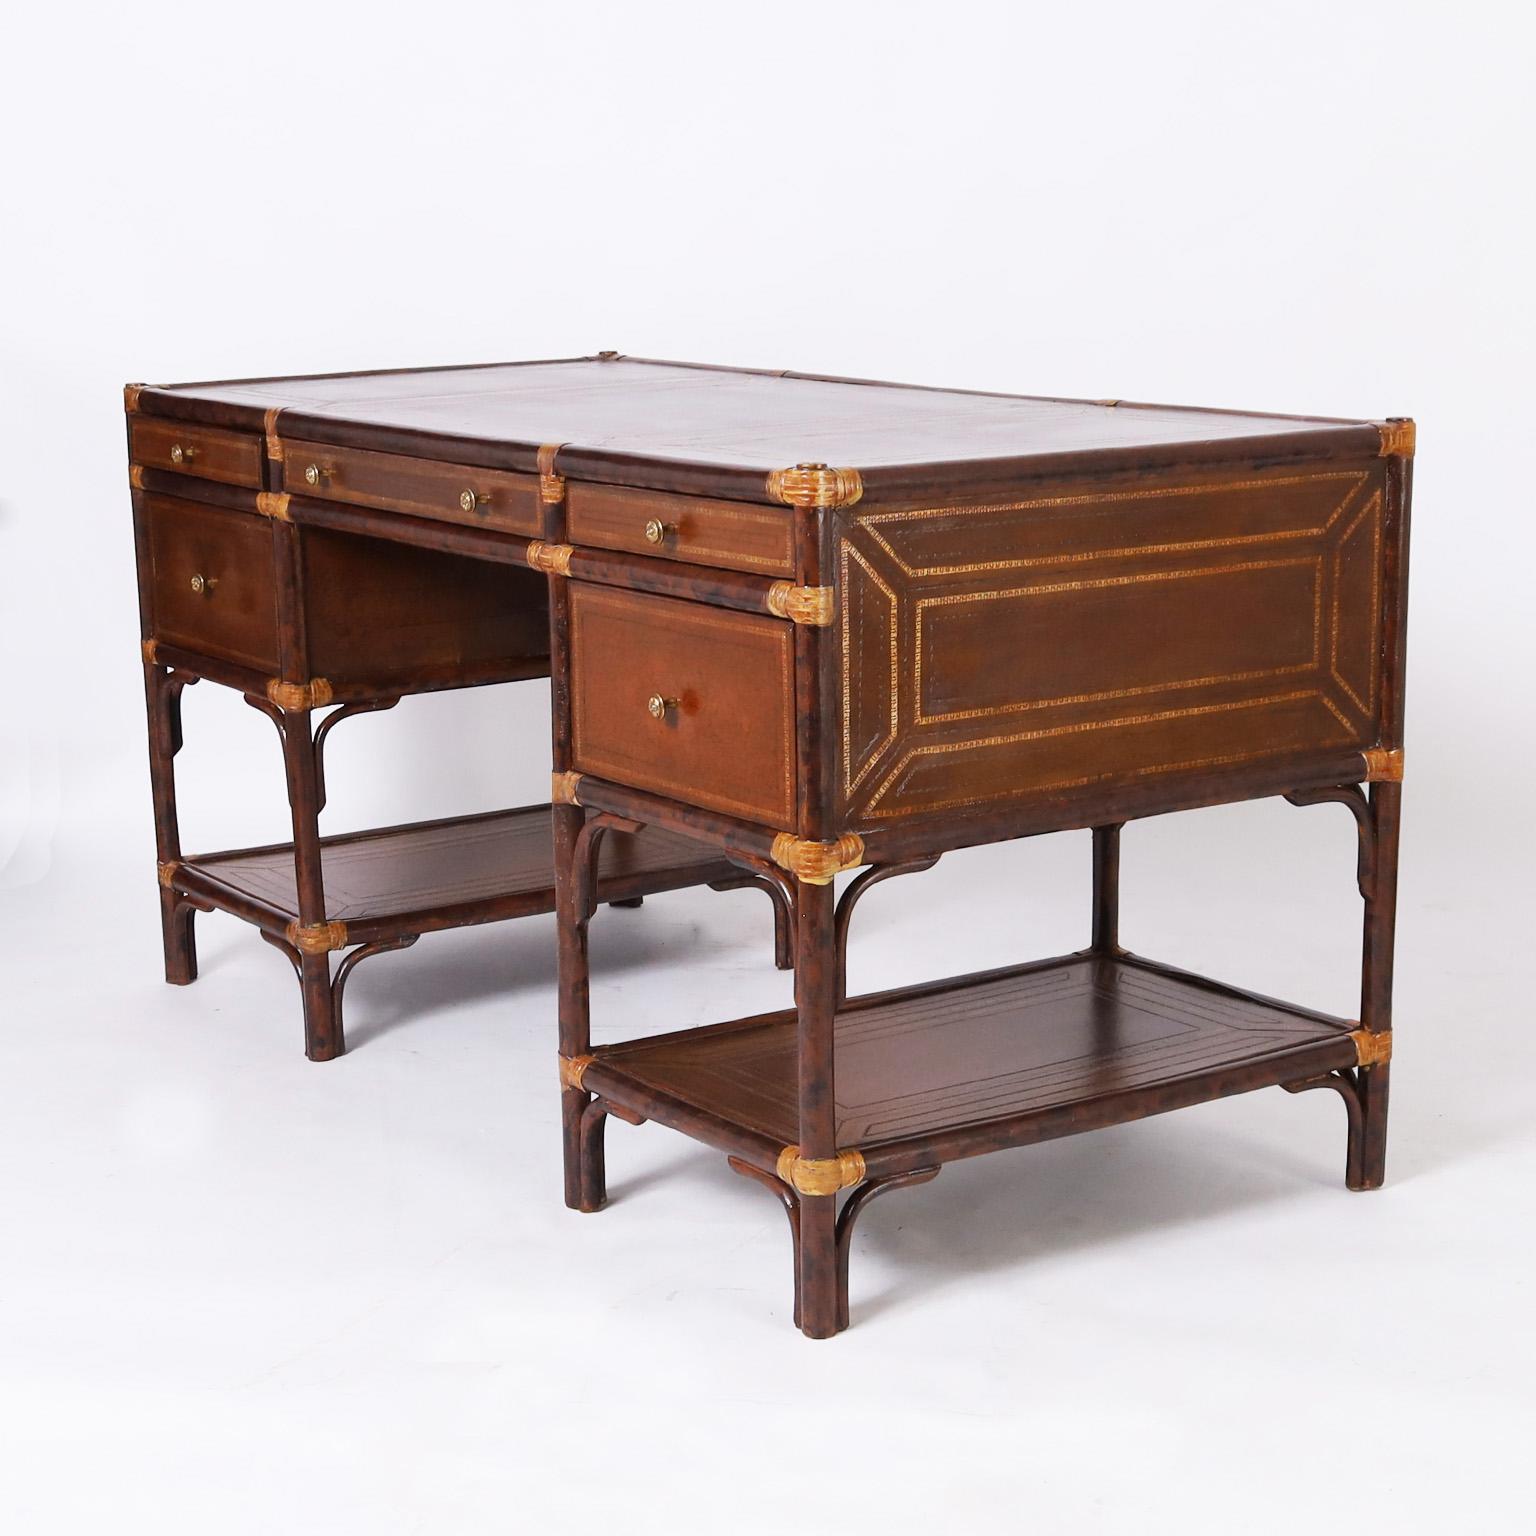 Philippine Maitland-Smith British Colonial Style Faux Bamboo and Leather Desk